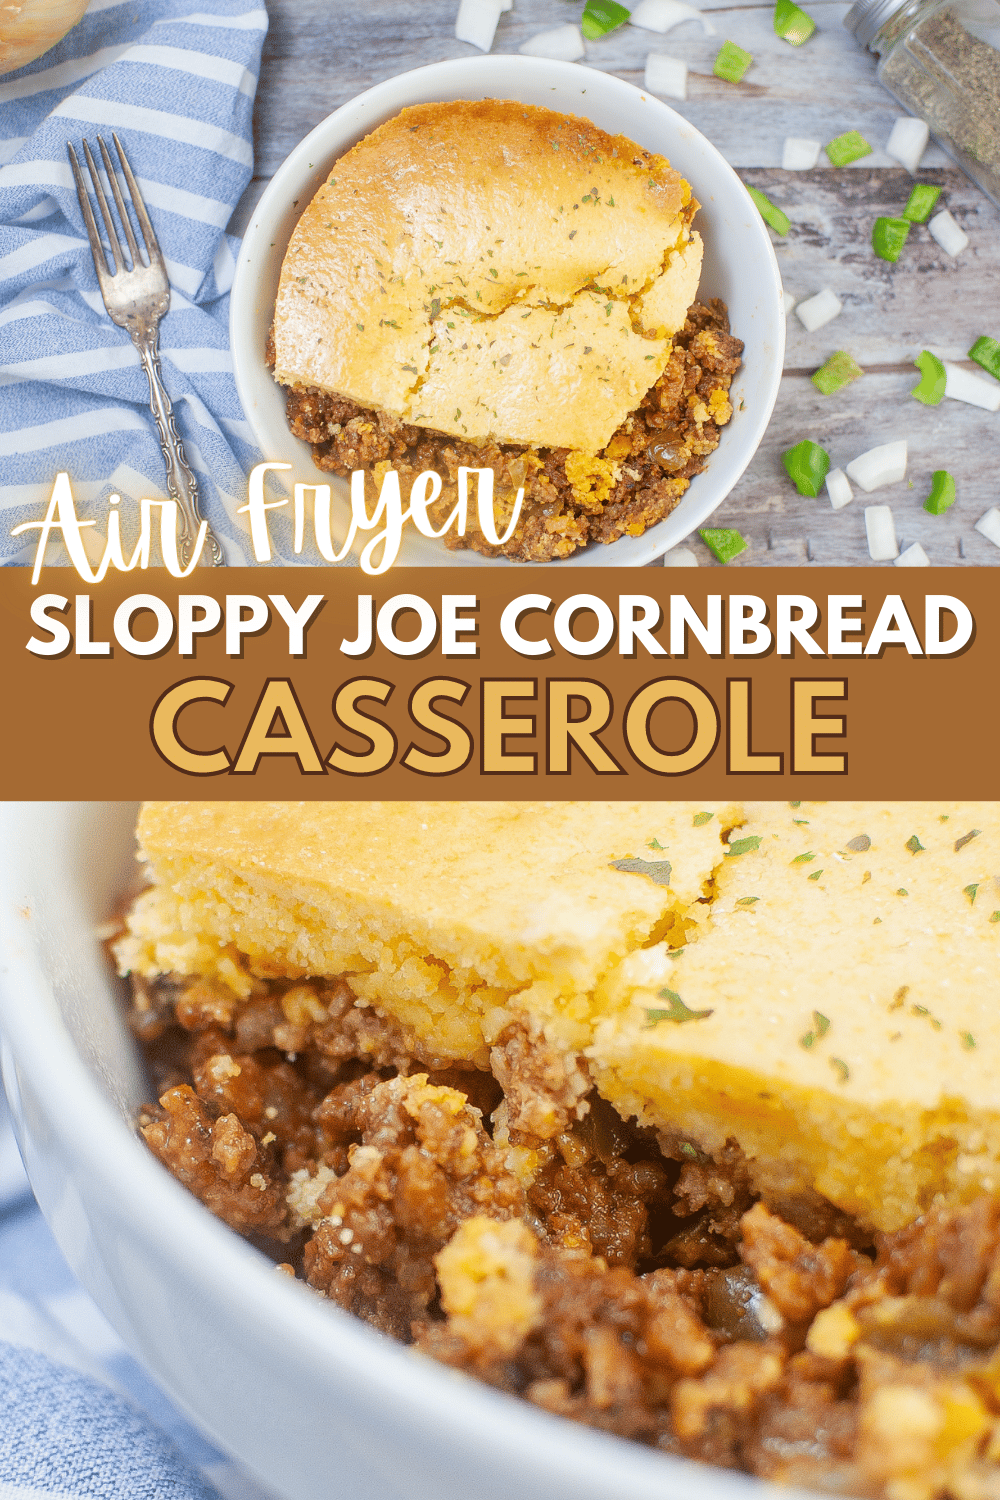 This Sloppy Joe Cornbread Casserole is an easy meal that the whole family will love! Made with just a few simple ingredients, it's perfect for busy weeknights. #airfryer #sloppyjoe #sloppyjoecornbreadcasserole #cornbread #casserole via @wondermomwannab